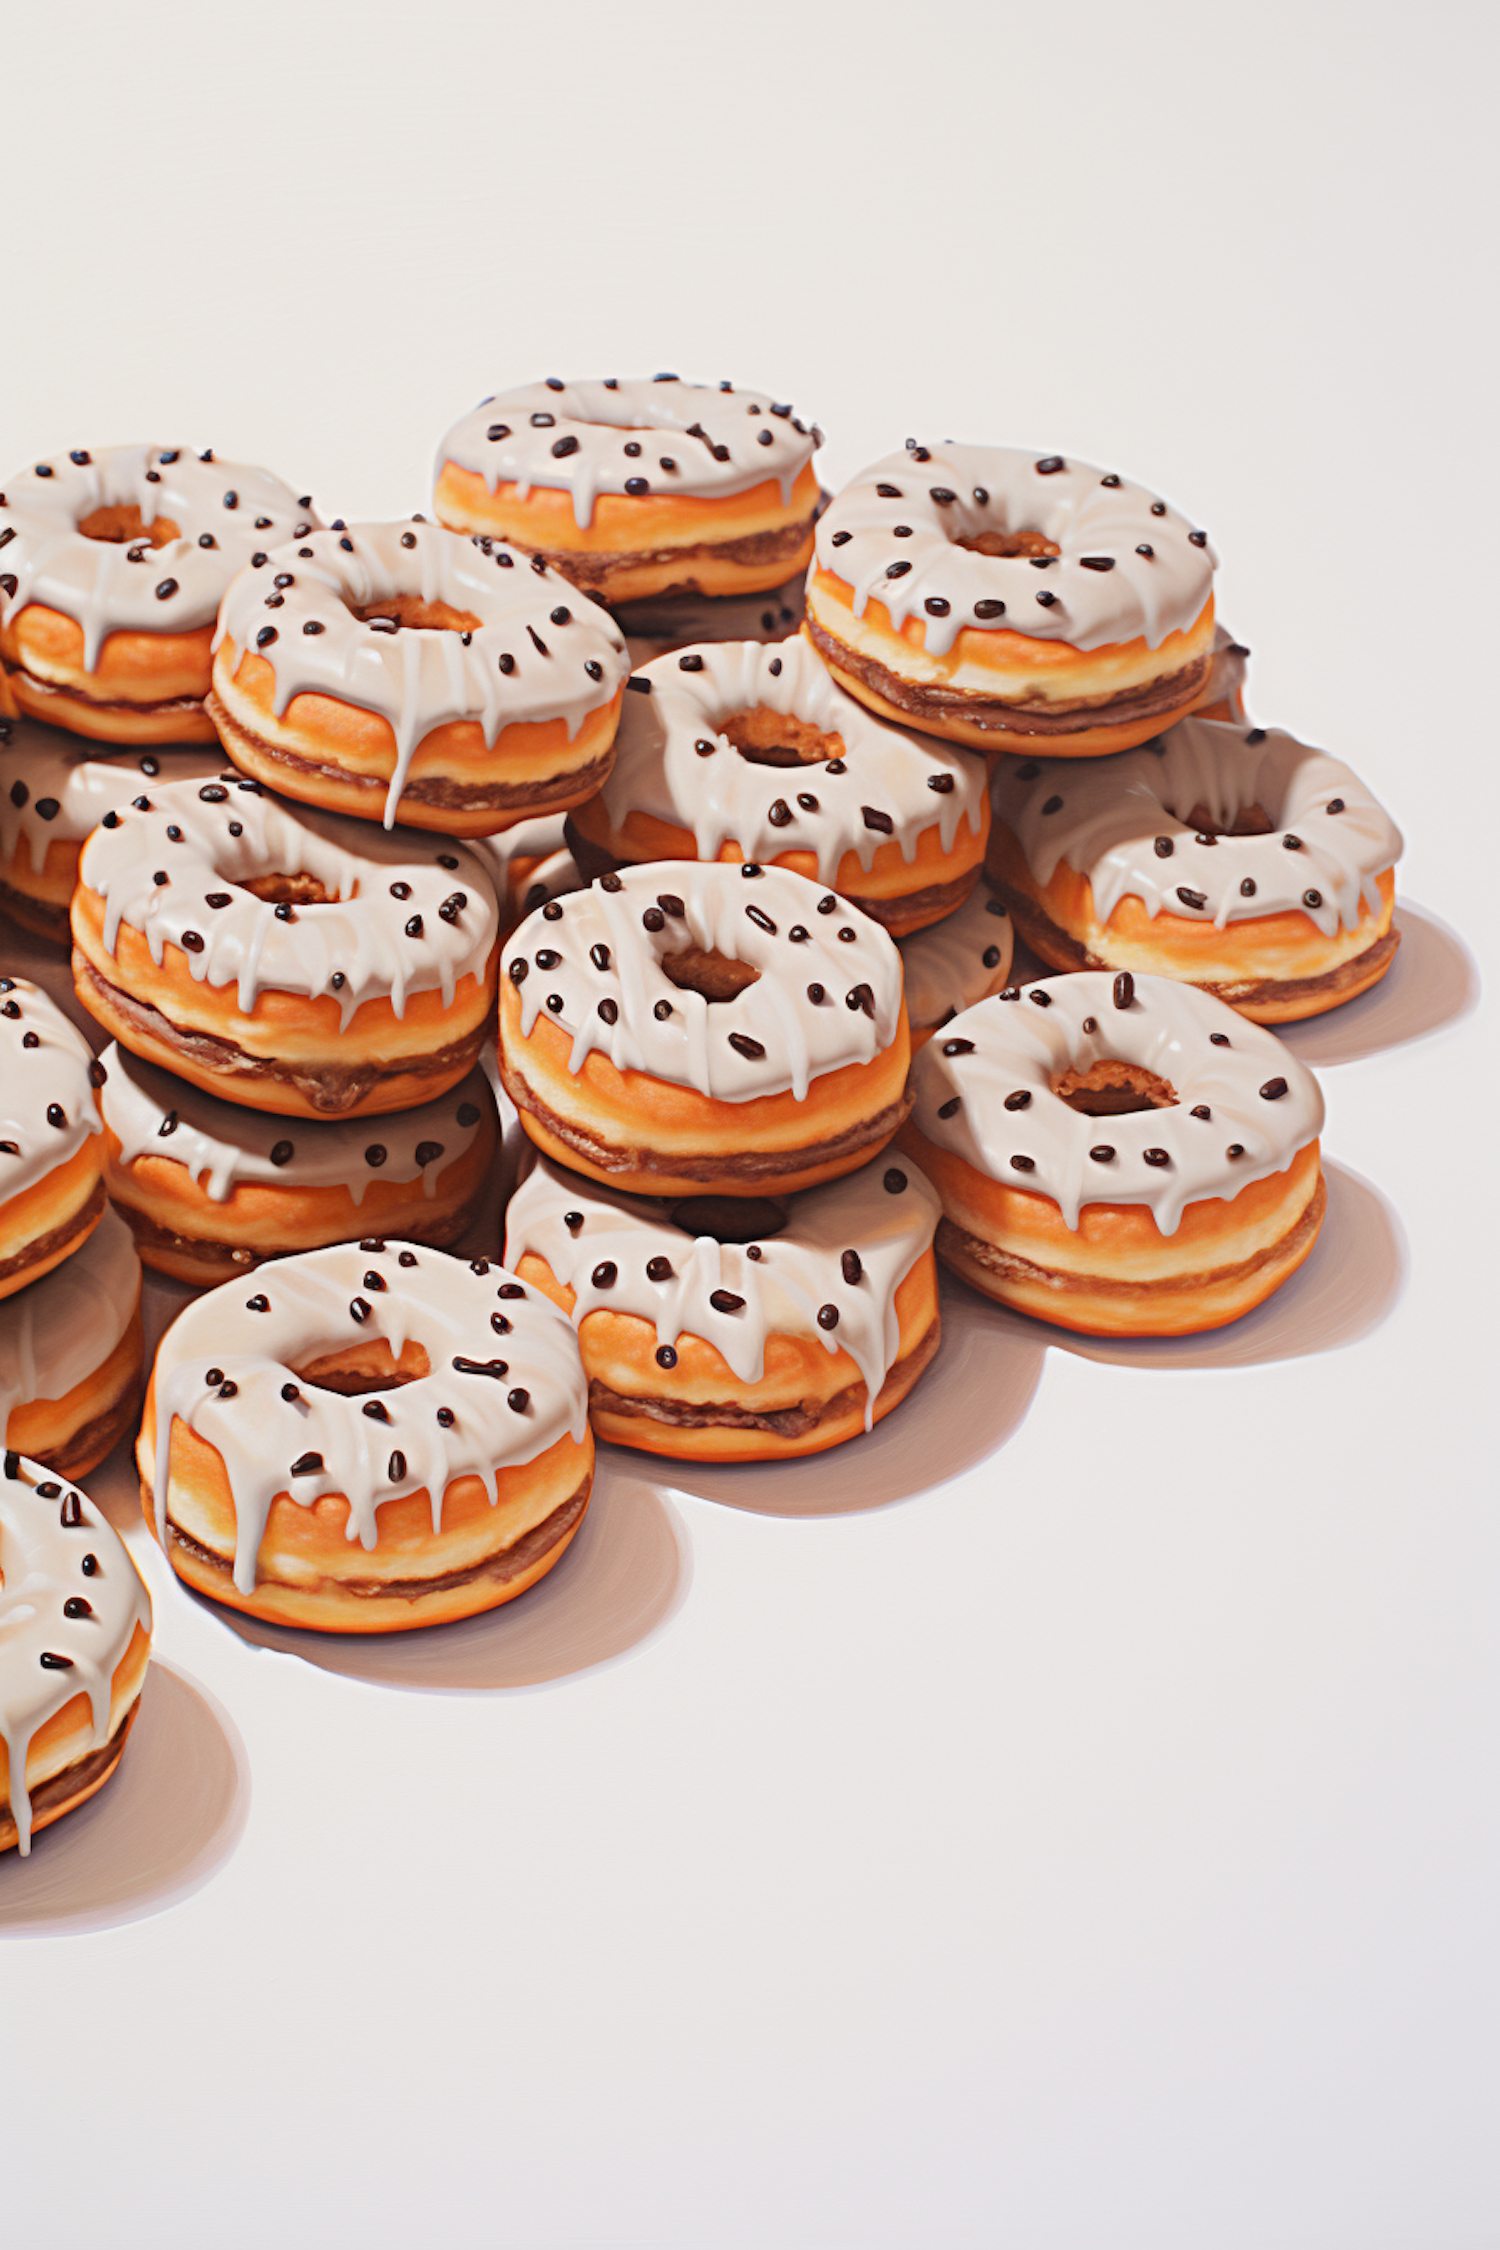 Classic Glazed Donuts with Chocolate Chips Pile